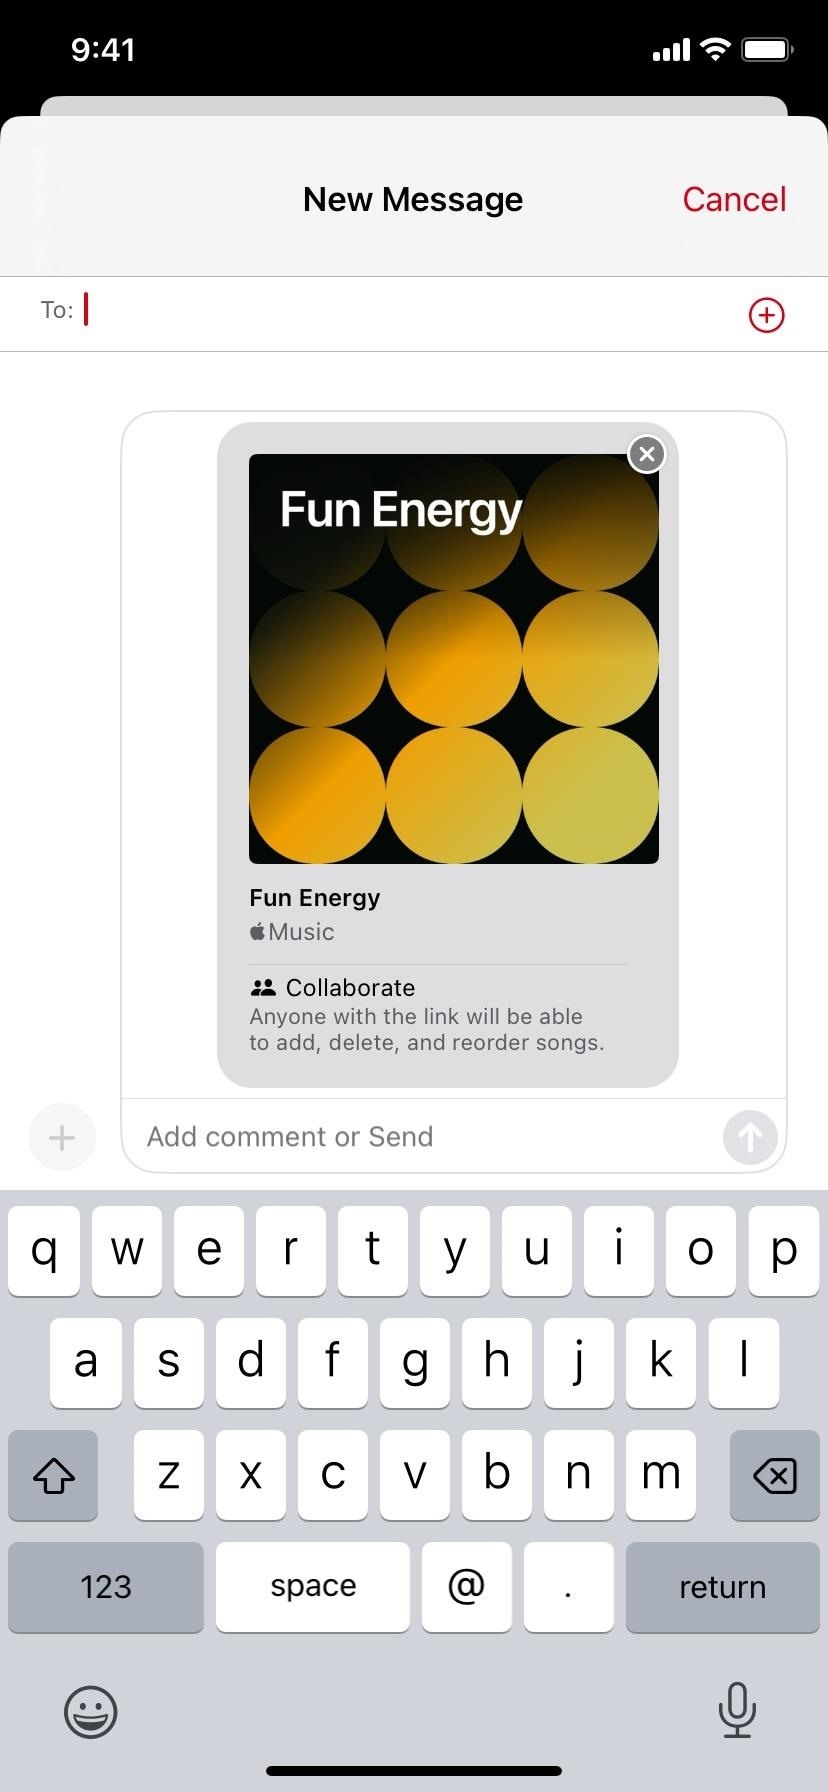 How to Create and Use Collaborative Playlists on Apple Music with Your Friends (Works on iPhone, Android, and More)